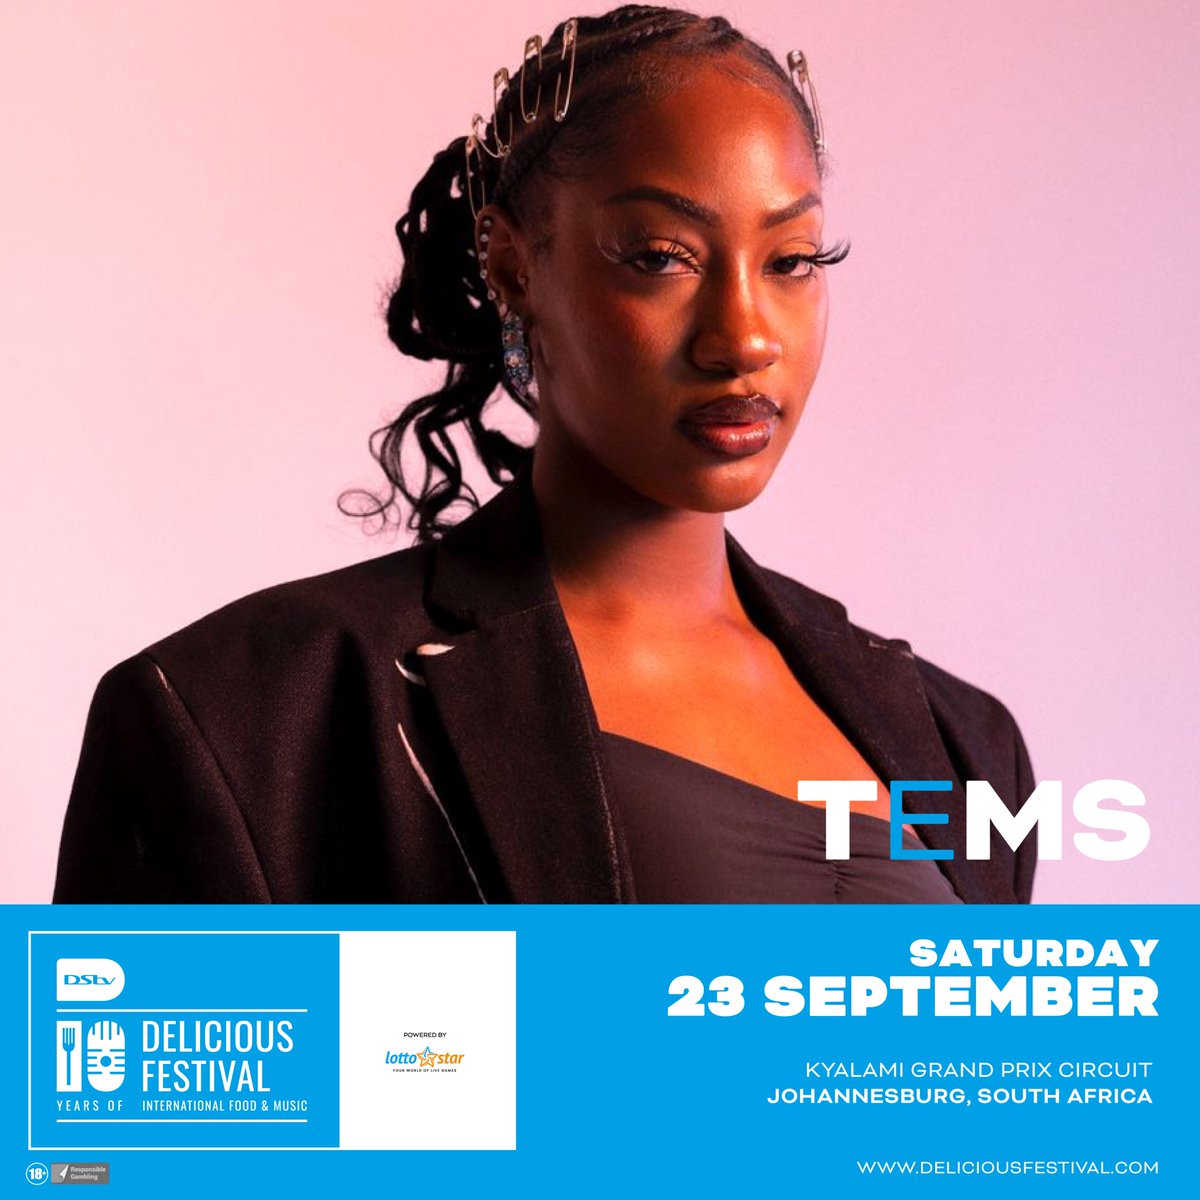 Catch @temsbaby at @DStv Delicious Festival Powered by LottoStar. Her soulful sound fuses Afrobeats, R&B, and pop. Let her music resonate deep within your soul and inspire you to be unapologetically you. #DStvDeliciousFestival